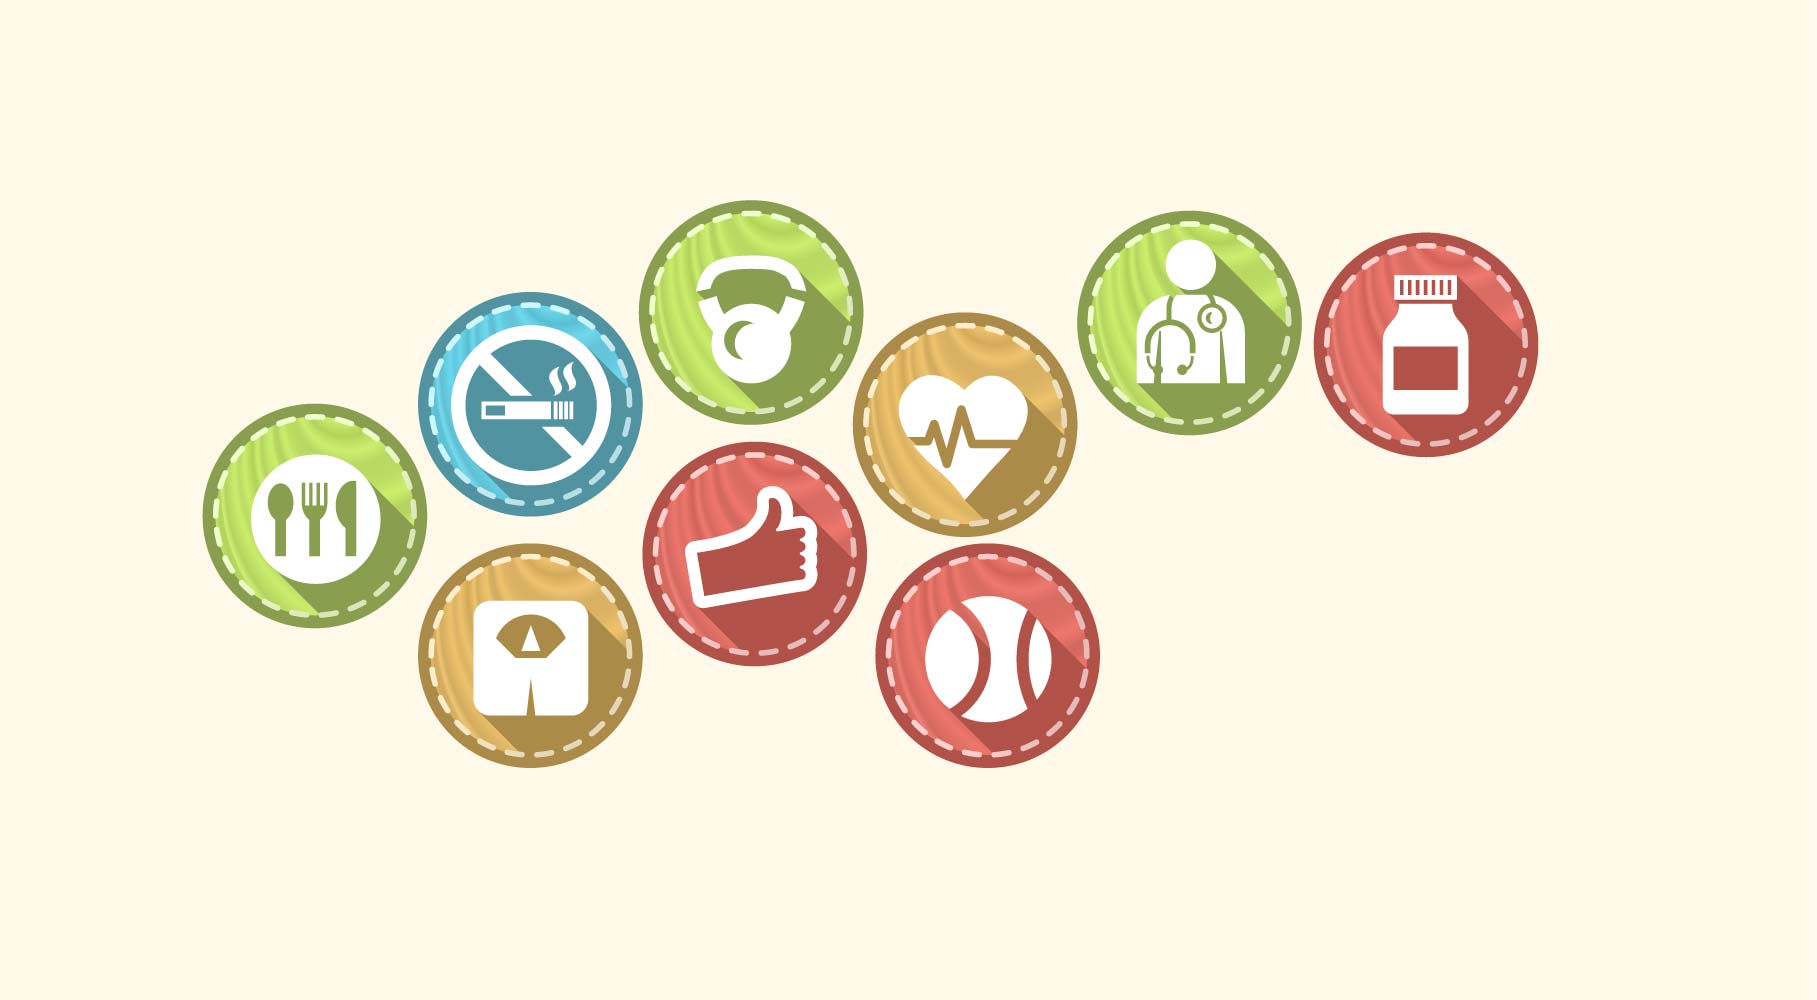 Little icons with health related objects in them